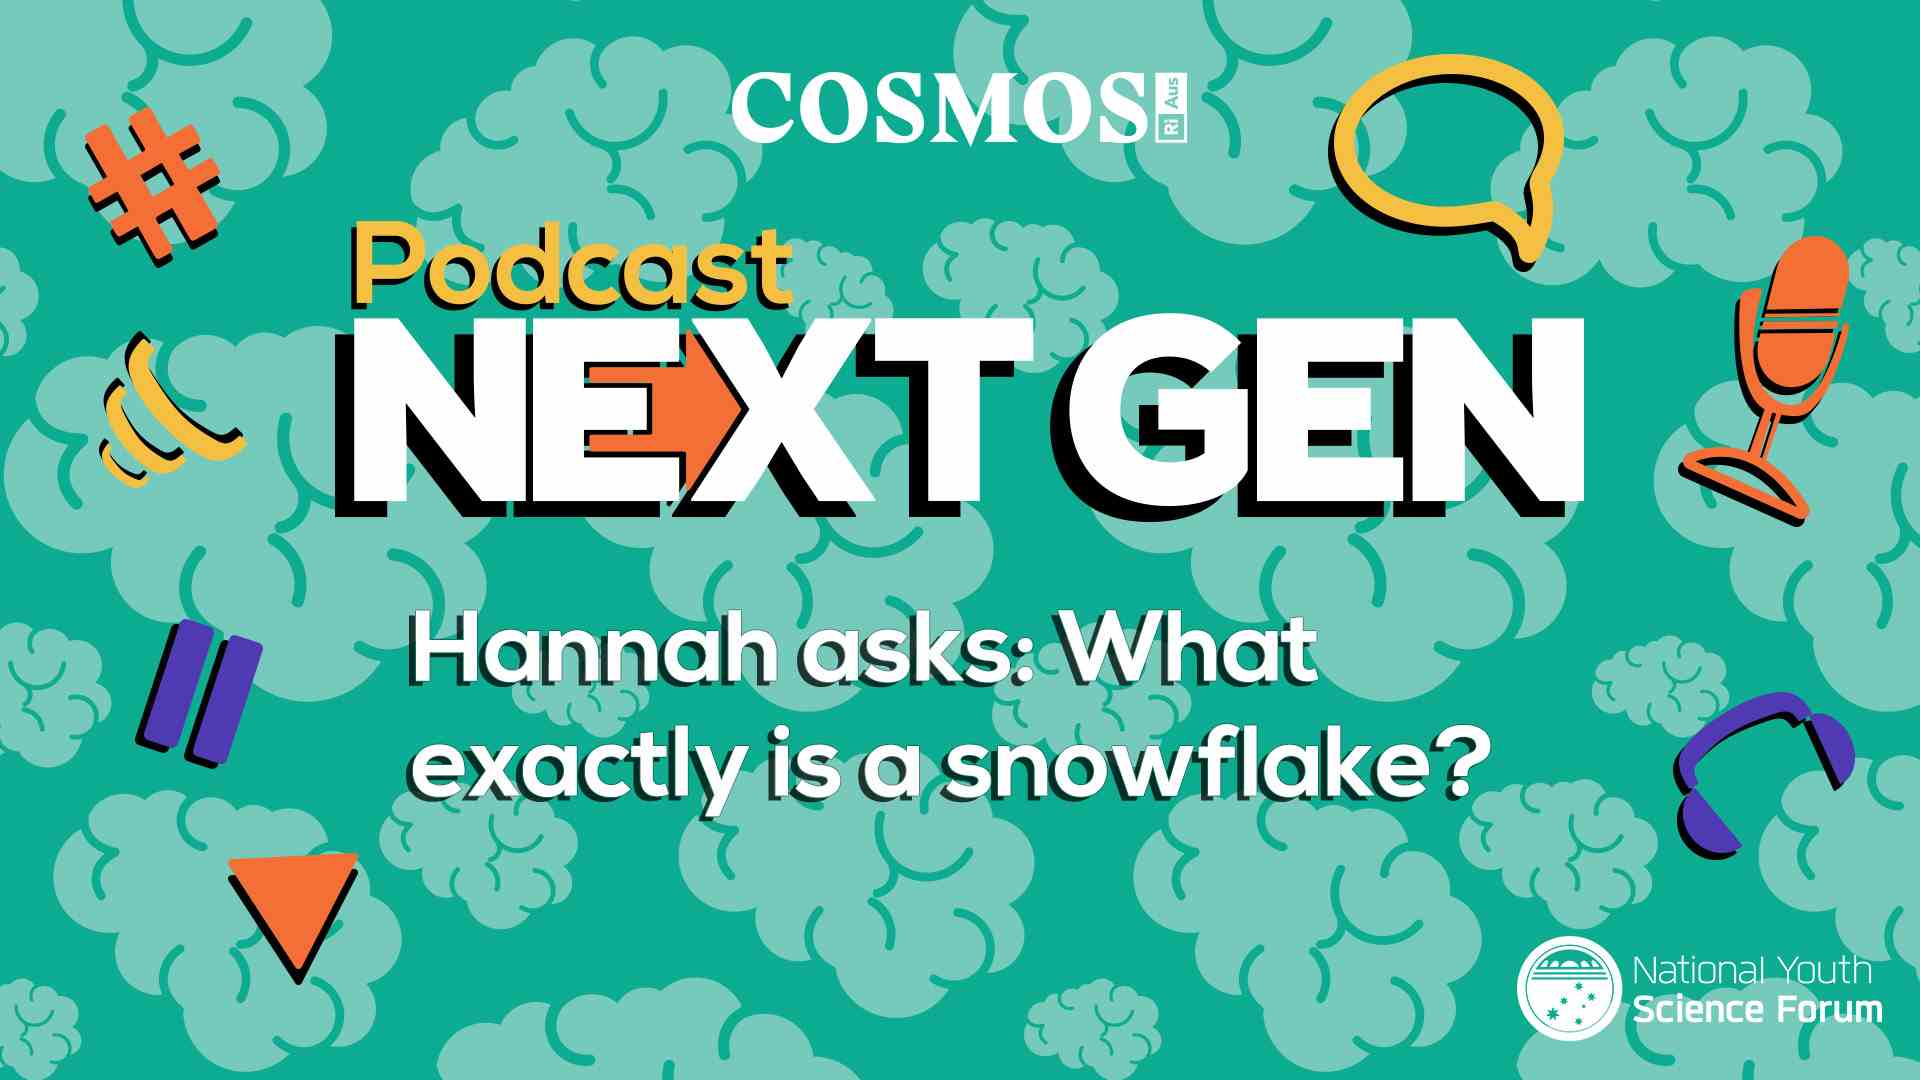 PODCAST NEXT GEN: What exactly is a snowflake?